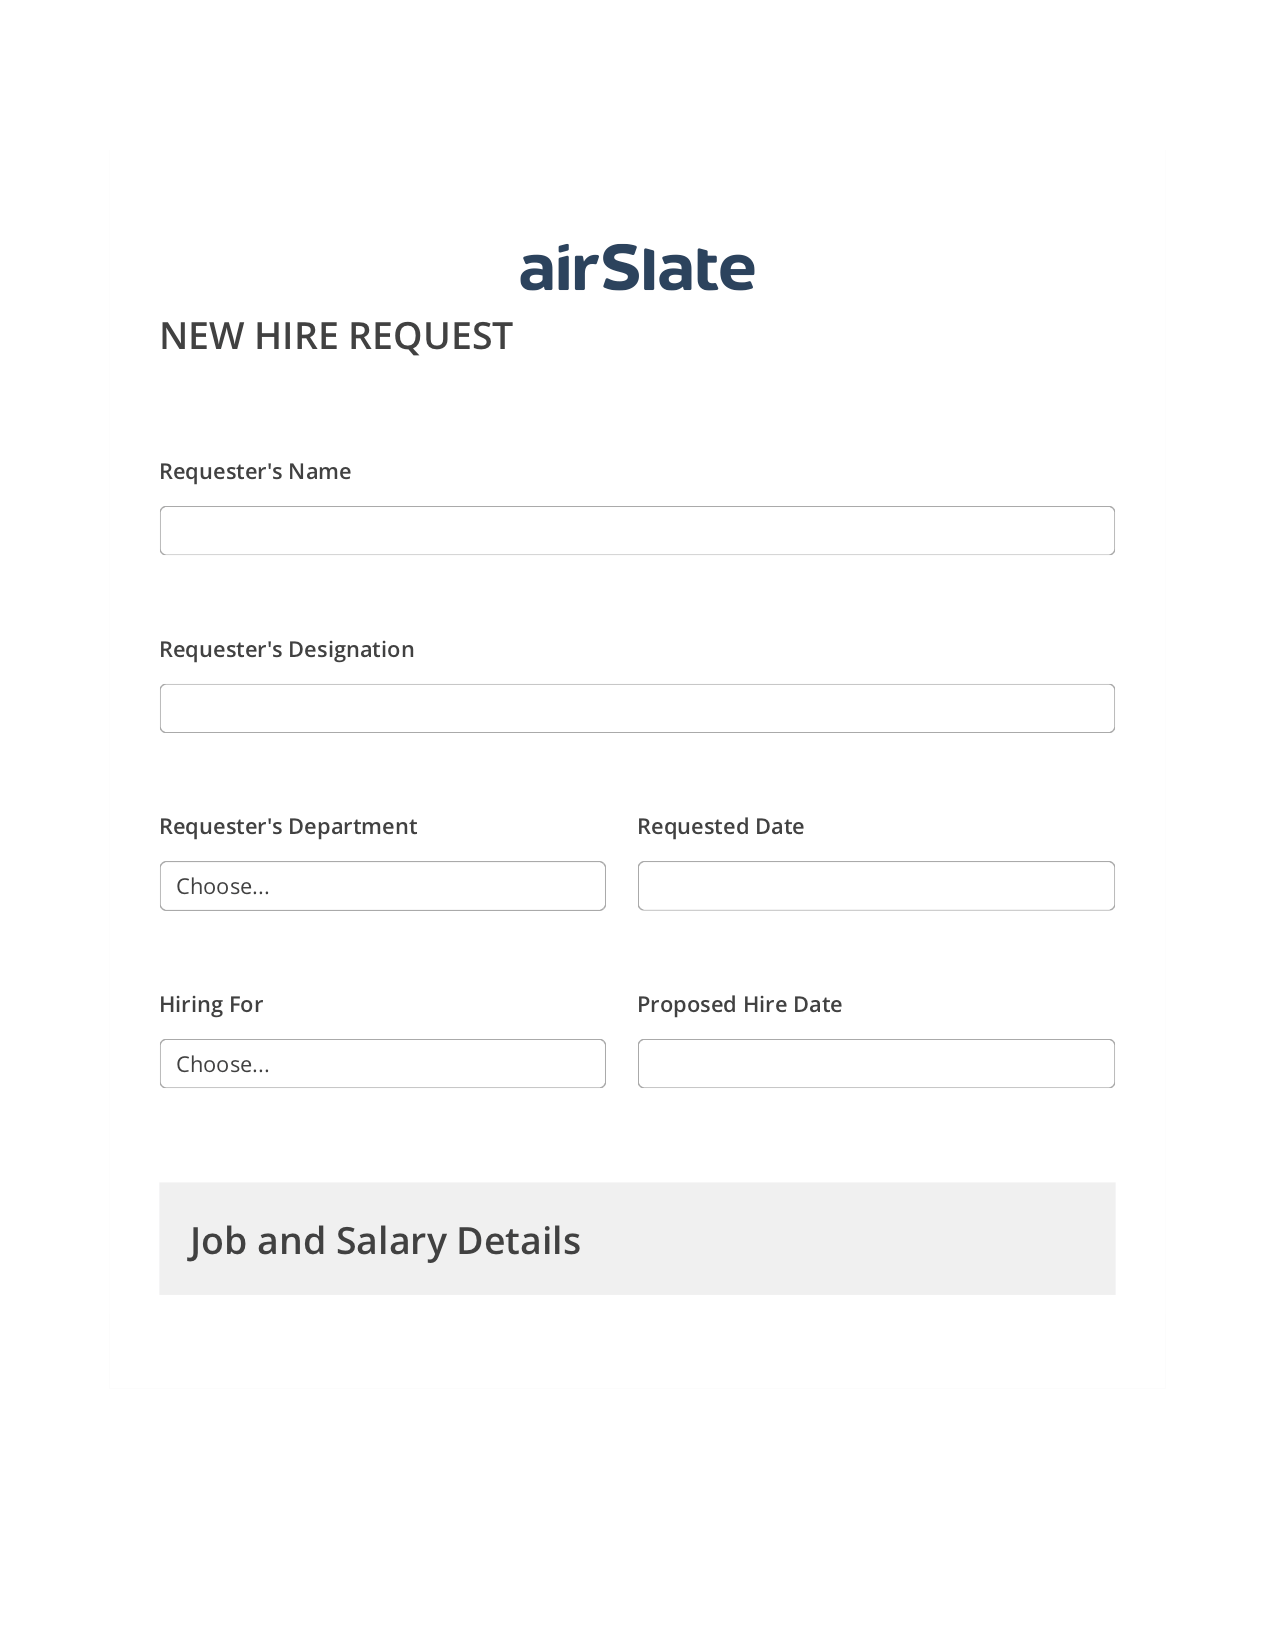 Multirole Hiring Request Workflow Pre-fill from AirTable Bot, Send a Slate to MS Dynamics 365 Contact Bot, Export to Smartsheet